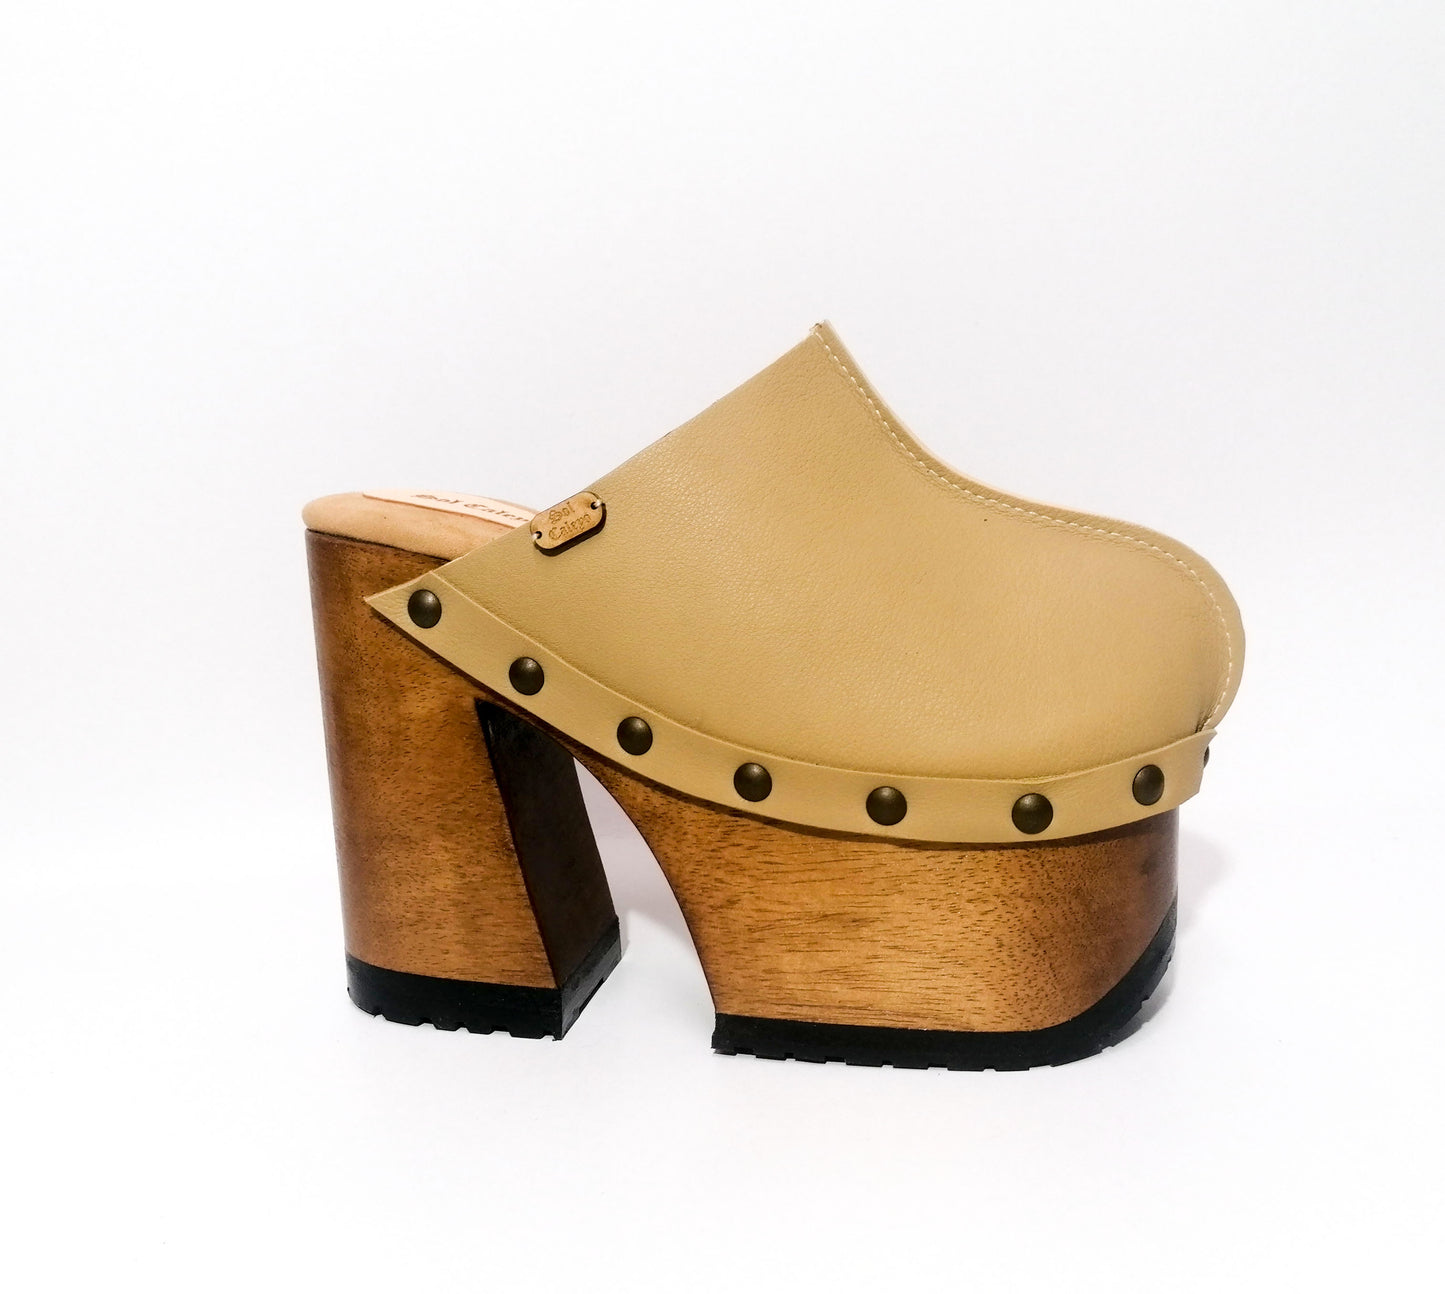 Beige leather clog vintage style 70s. Leather clog with super high wooden heel. Vintage style wooden clog. Sizes 34 to 47. High quality handmade leather shoes by sol Caleyo. Sustainable fashion.